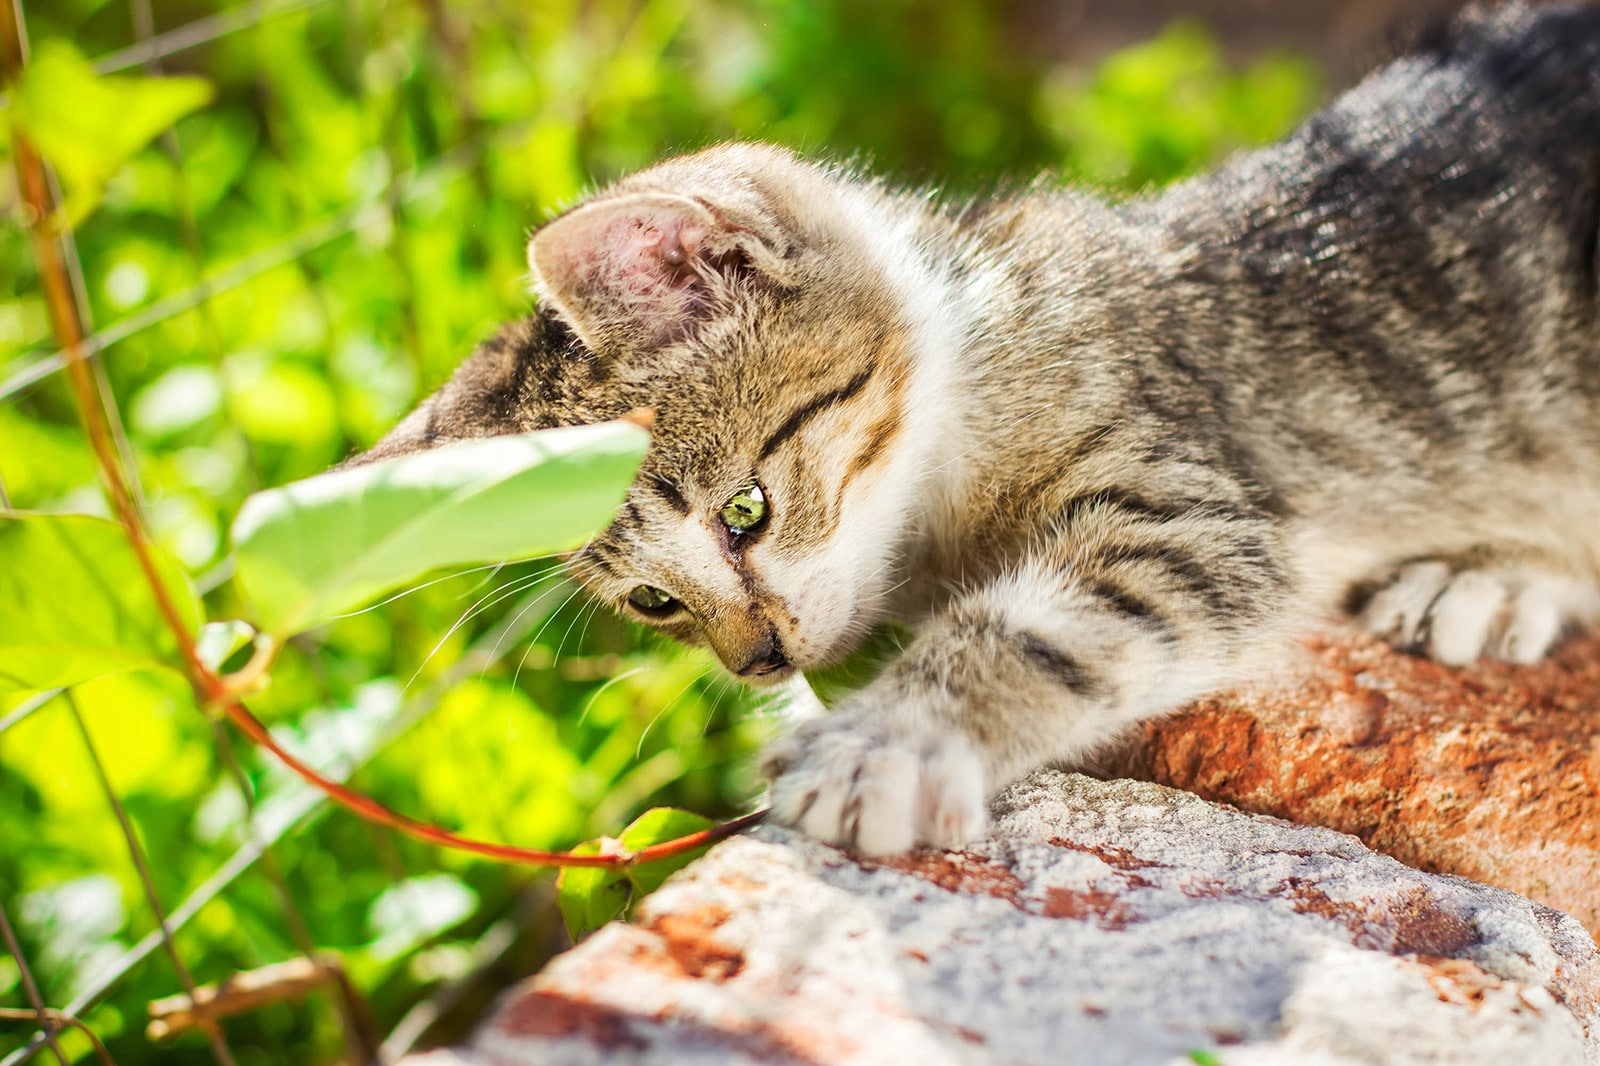 Kitten pawing at a brick wall in a garden